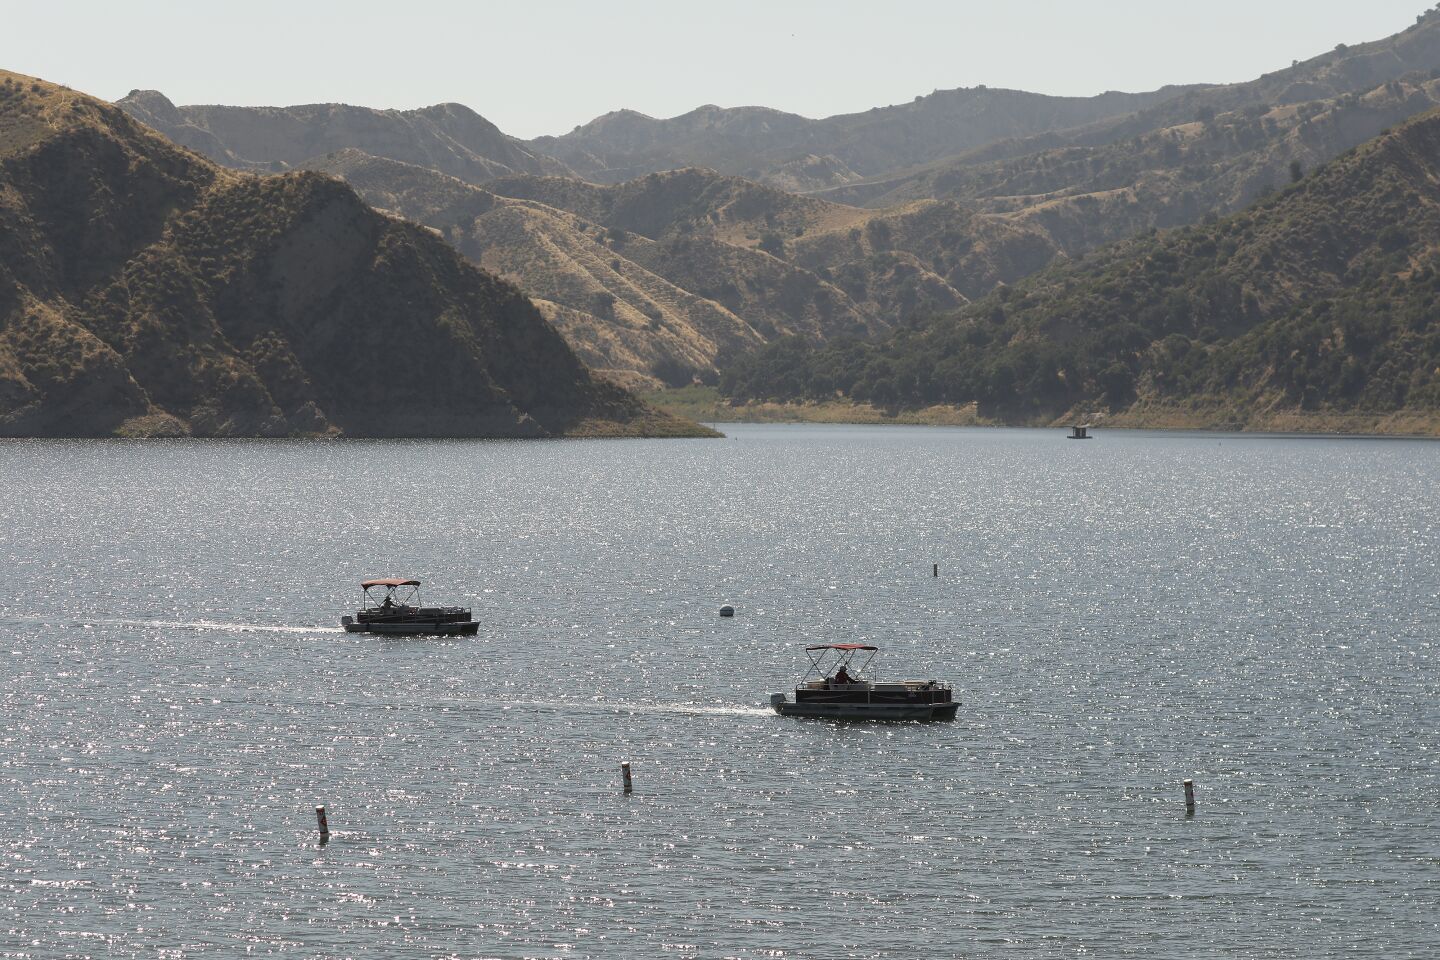 Boats return with rescuers on Lake Piru as it is learned that a Ventura County Sheriff's dive team located a body.